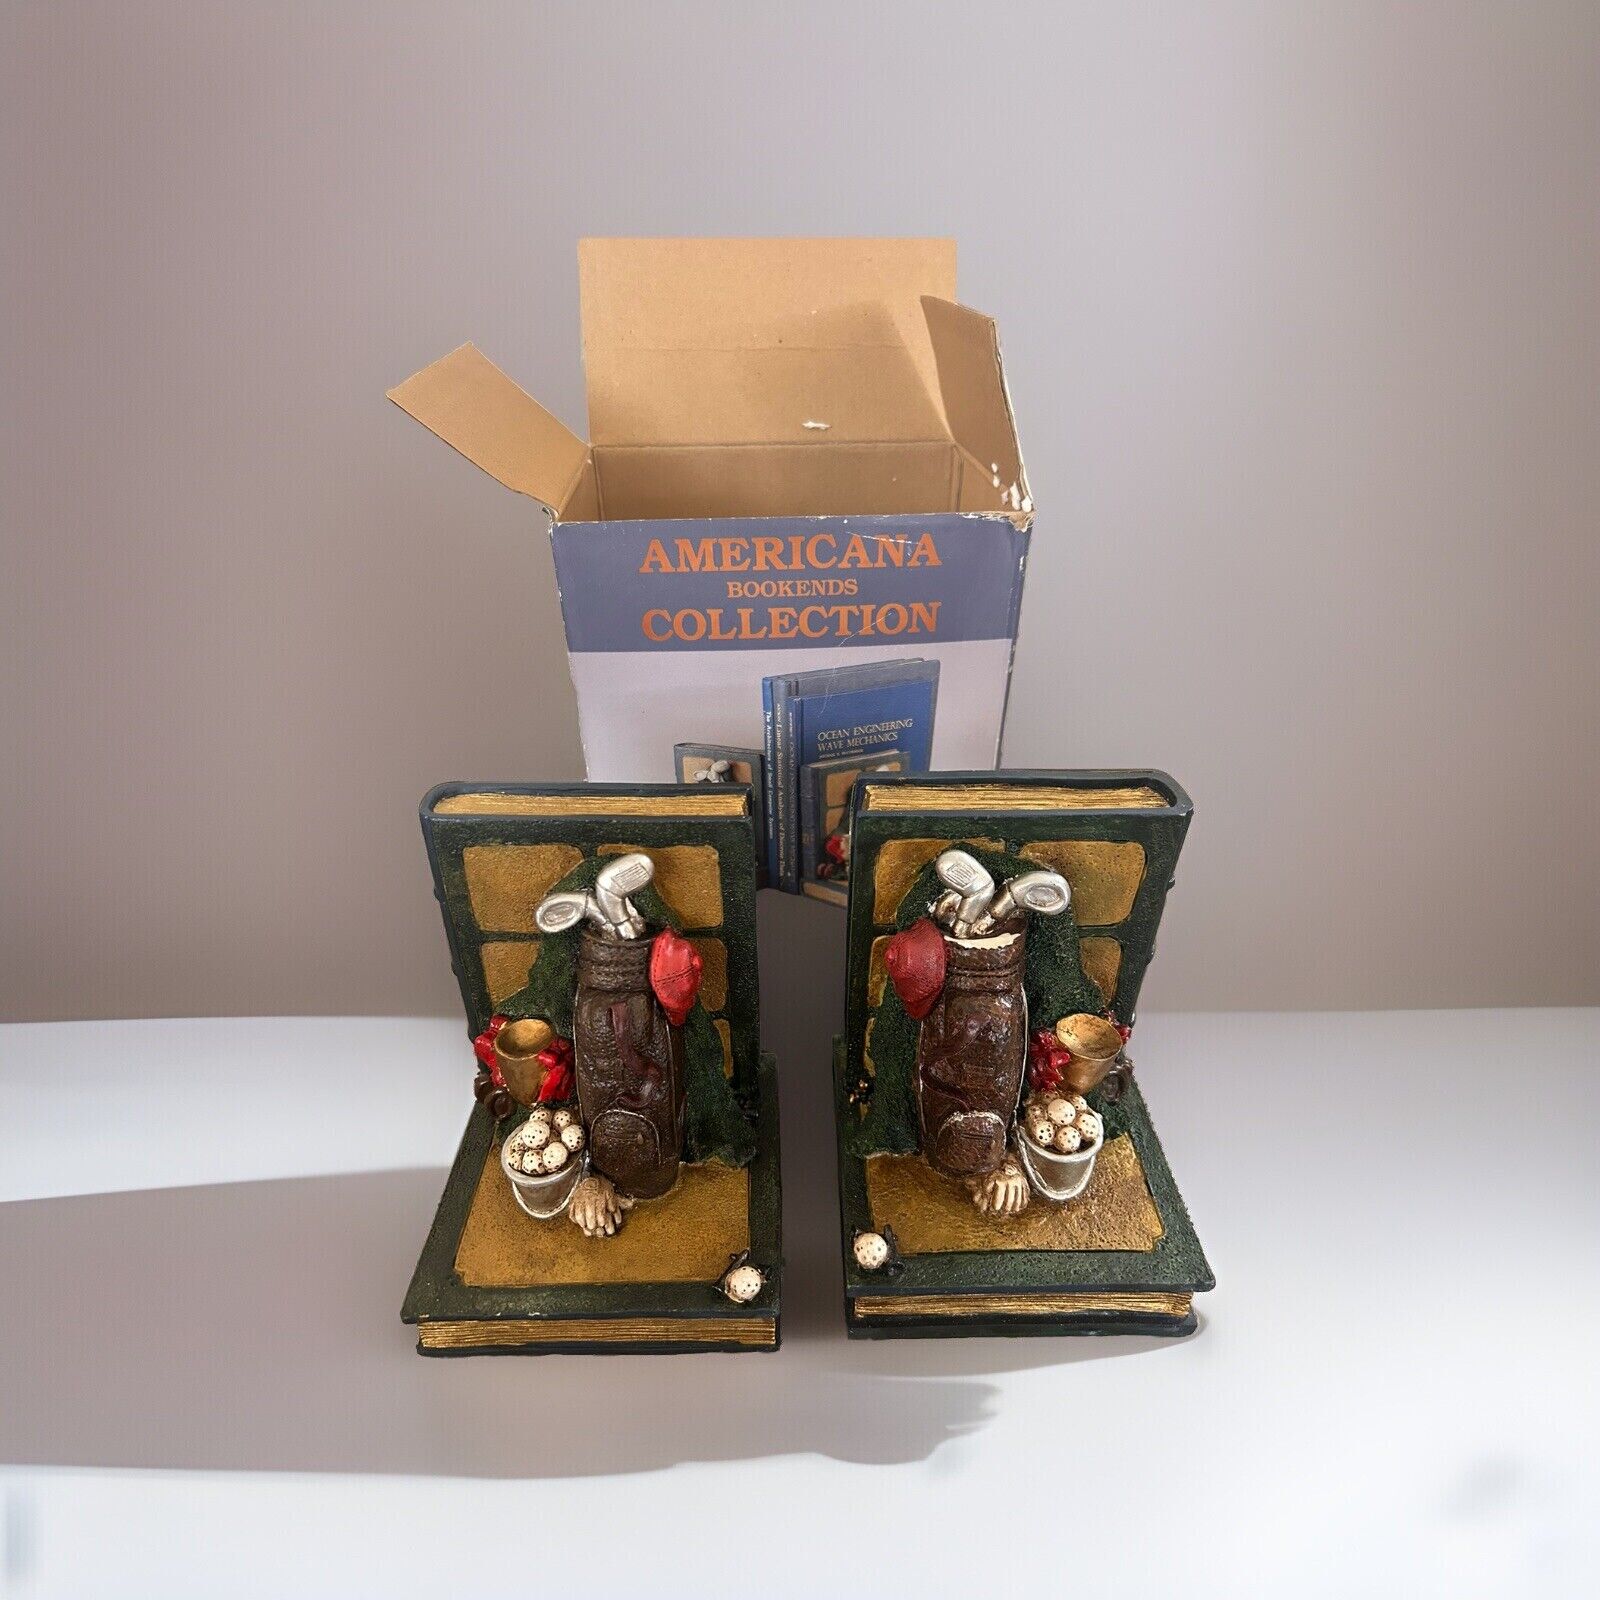 GOLF DECOR BOOKENDS VINTAGE RESIN AMERICANA BOOKEND COLLECTION